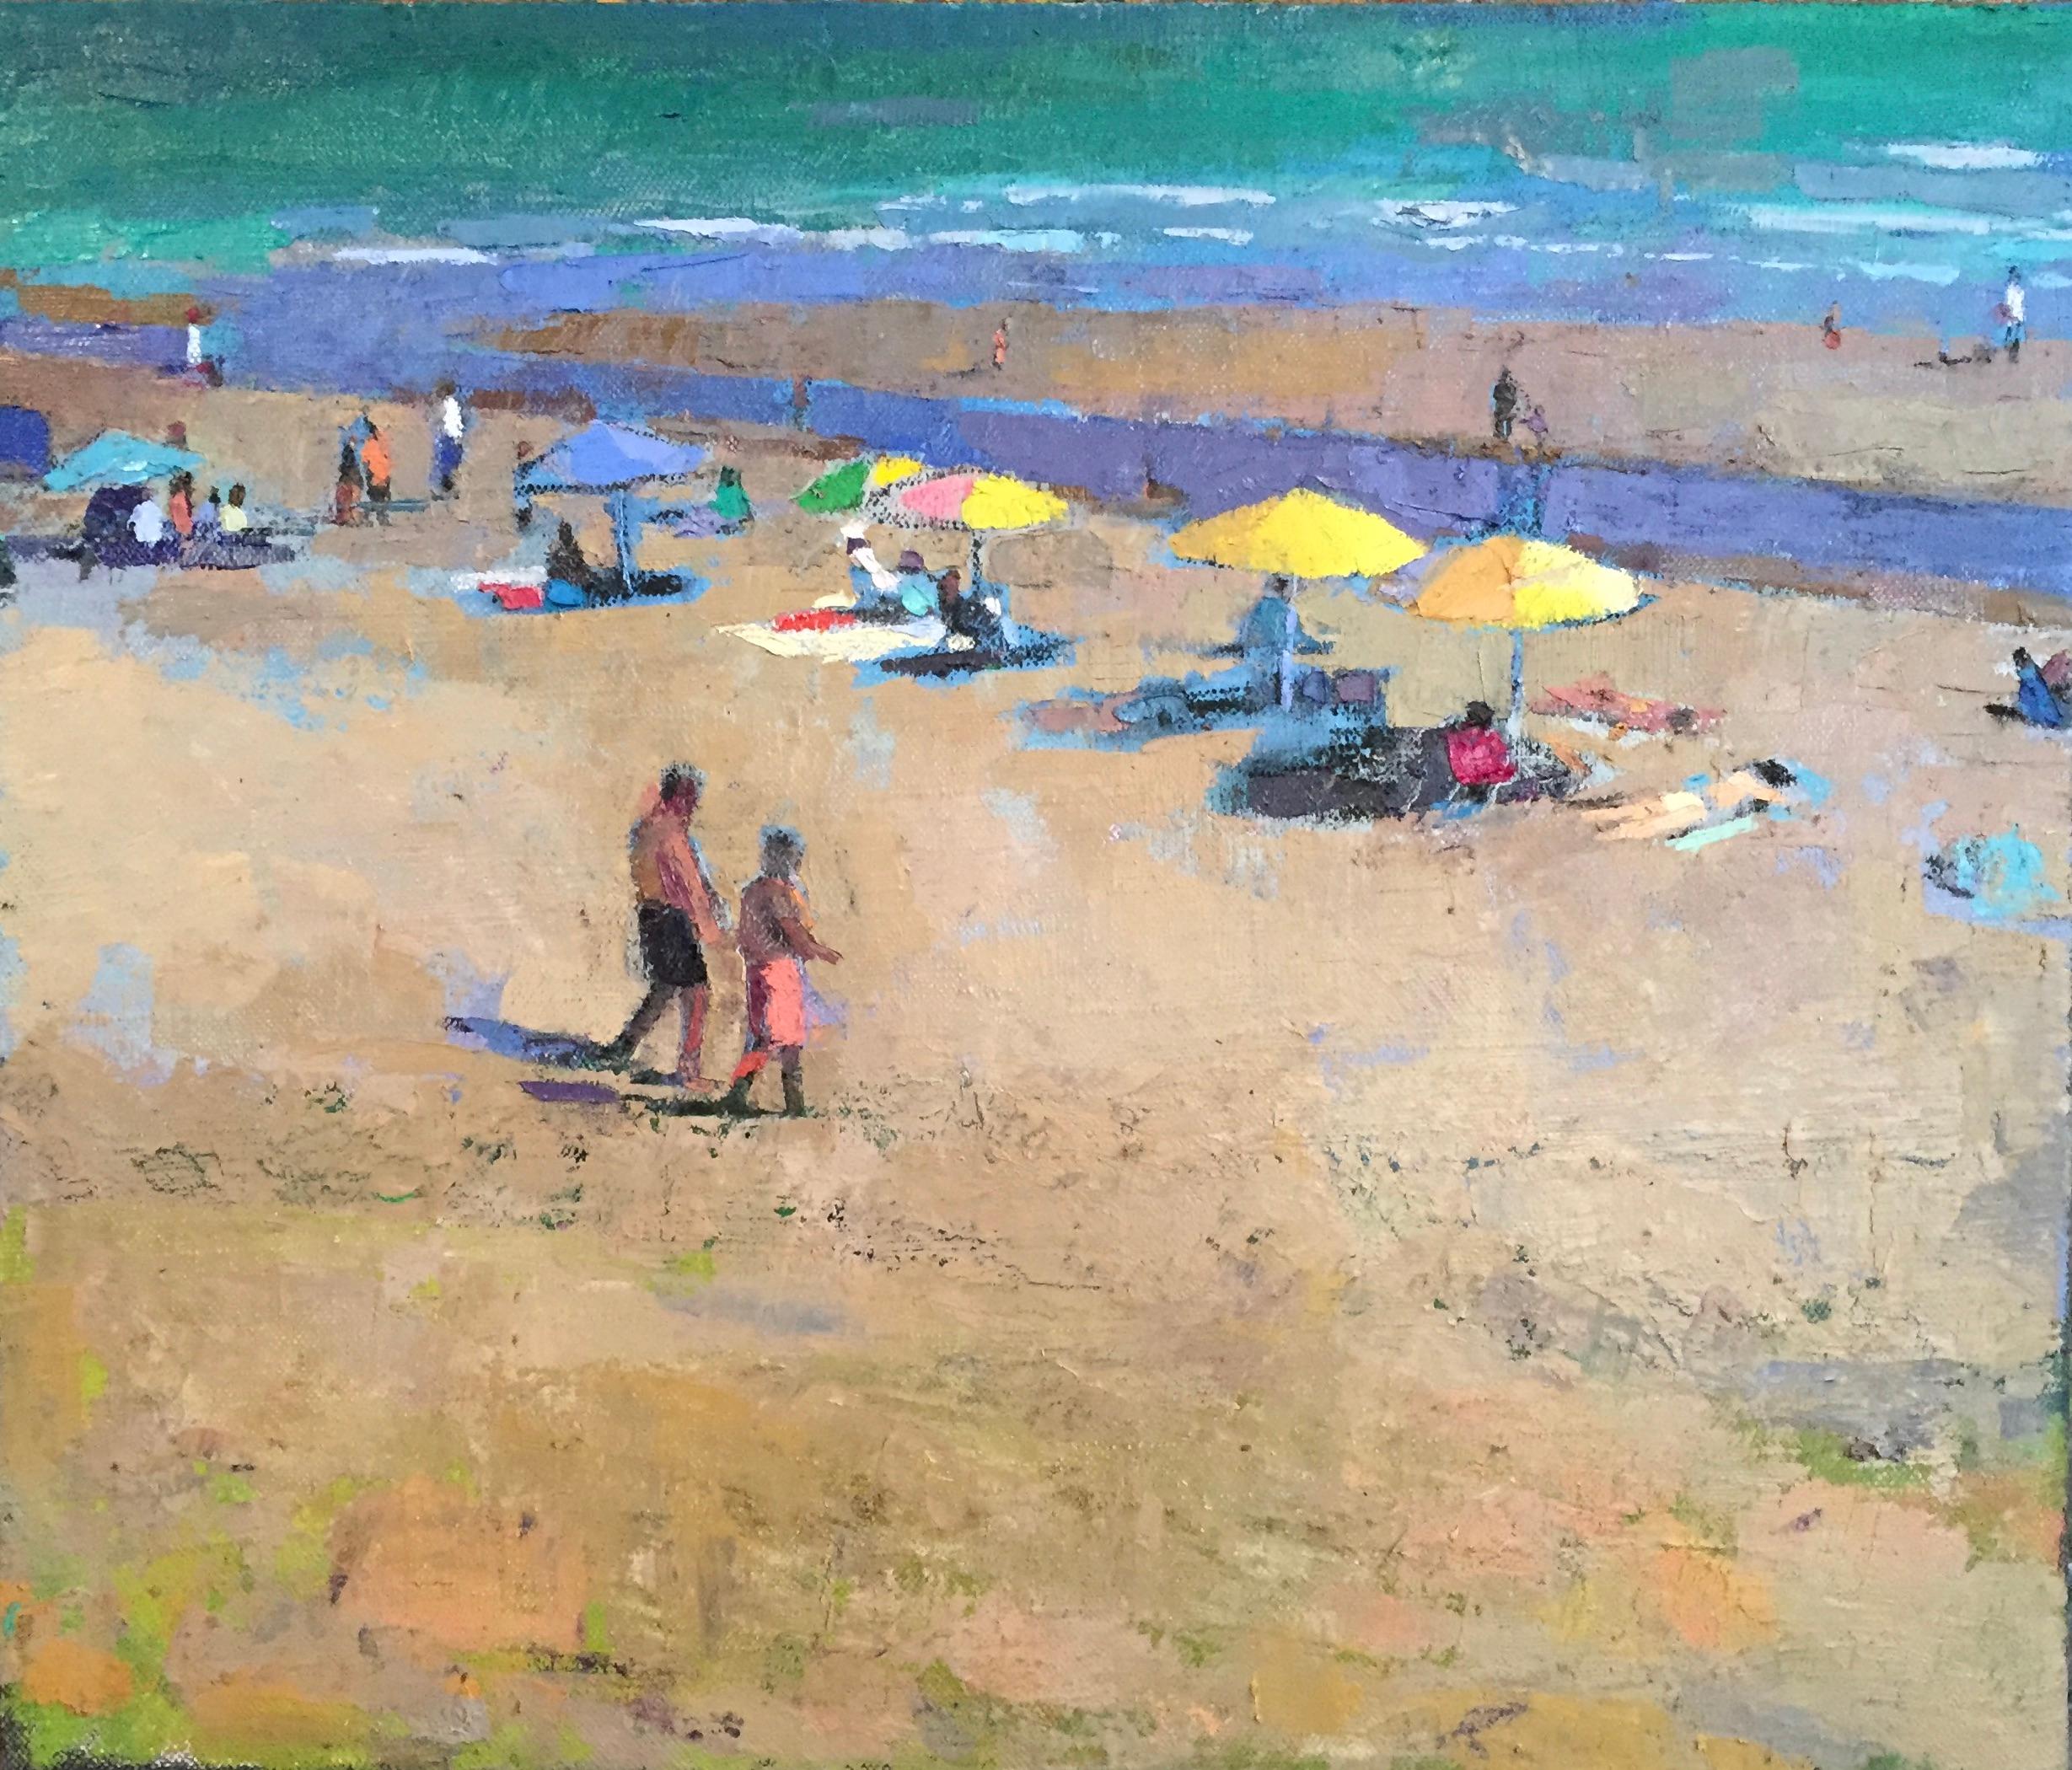 Larry Horowitz Landscape Painting - "Morning Sandbar" oil painting of colorful umbrellas and people at the beach